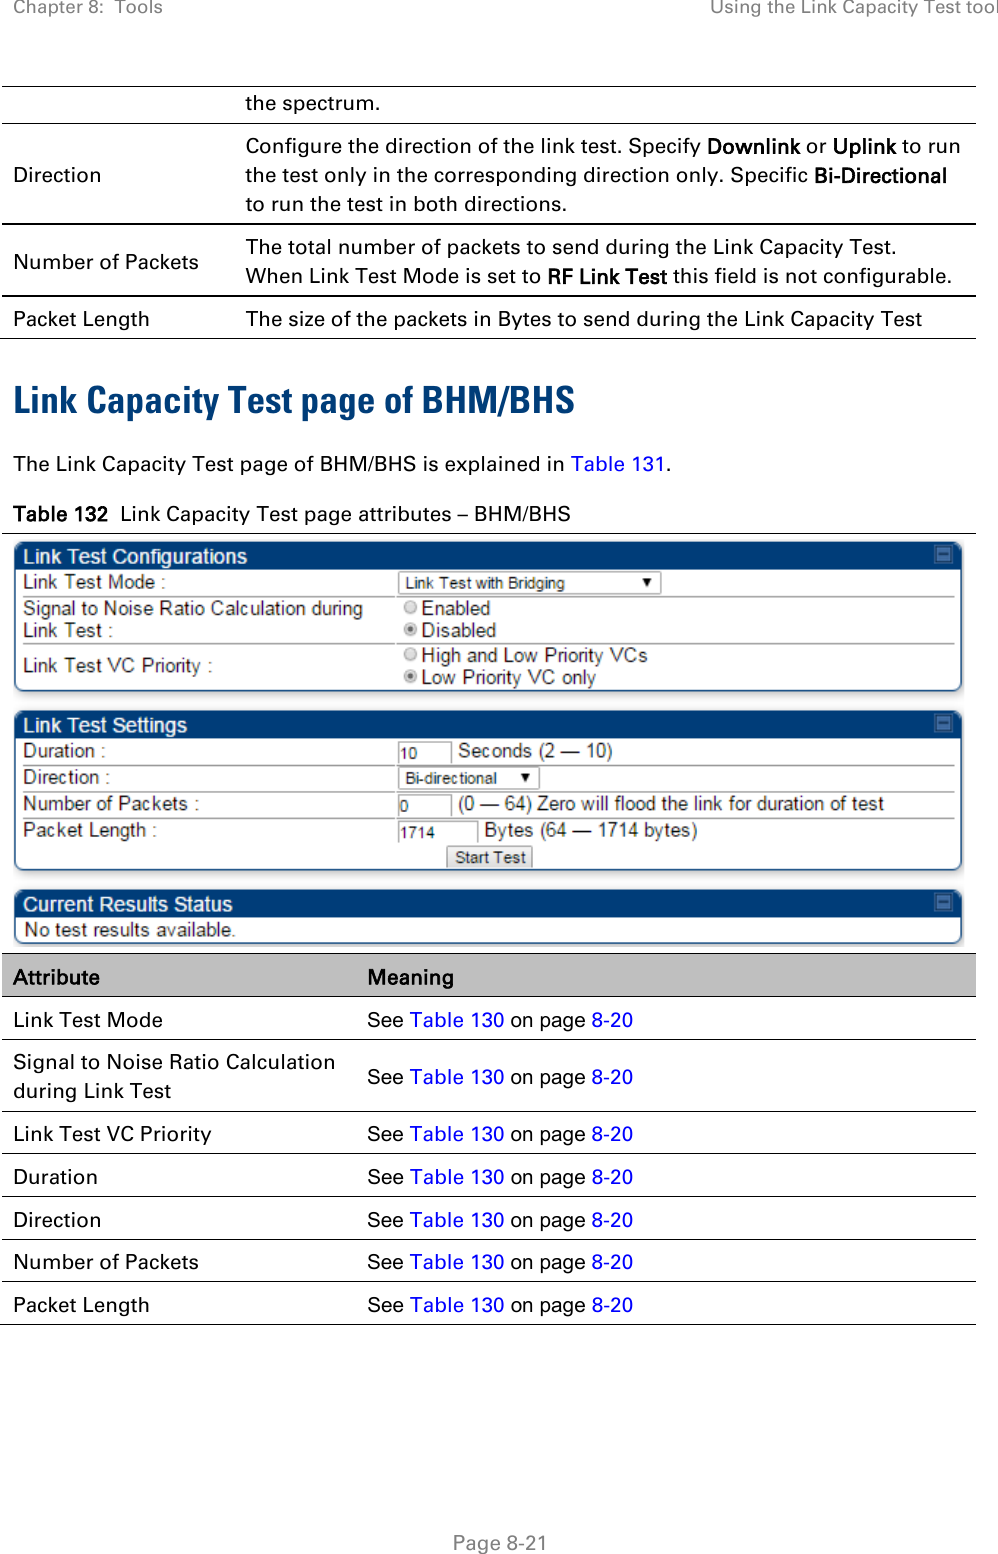 Chapter 8:  Tools Using the Link Capacity Test tool   Page 8-21 the spectrum. Direction Configure the direction of the link test. Specify Downlink or Uplink to run the test only in the corresponding direction only. Specific Bi-Directional to run the test in both directions. Number of Packets The total number of packets to send during the Link Capacity Test.  When Link Test Mode is set to RF Link Test this field is not configurable. Packet Length The size of the packets in Bytes to send during the Link Capacity Test Link Capacity Test page of BHM/BHS The Link Capacity Test page of BHM/BHS is explained in Table 131. Table 132  Link Capacity Test page attributes – BHM/BHS  Attribute Meaning Link Test Mode See Table 130 on page 8-20 Signal to Noise Ratio Calculation during Link Test See Table 130 on page 8-20 Link Test VC Priority See Table 130 on page 8-20 Duration See Table 130 on page 8-20 Direction See Table 130 on page 8-20 Number of Packets See Table 130 on page 8-20 Packet Length See Table 130 on page 8-20 